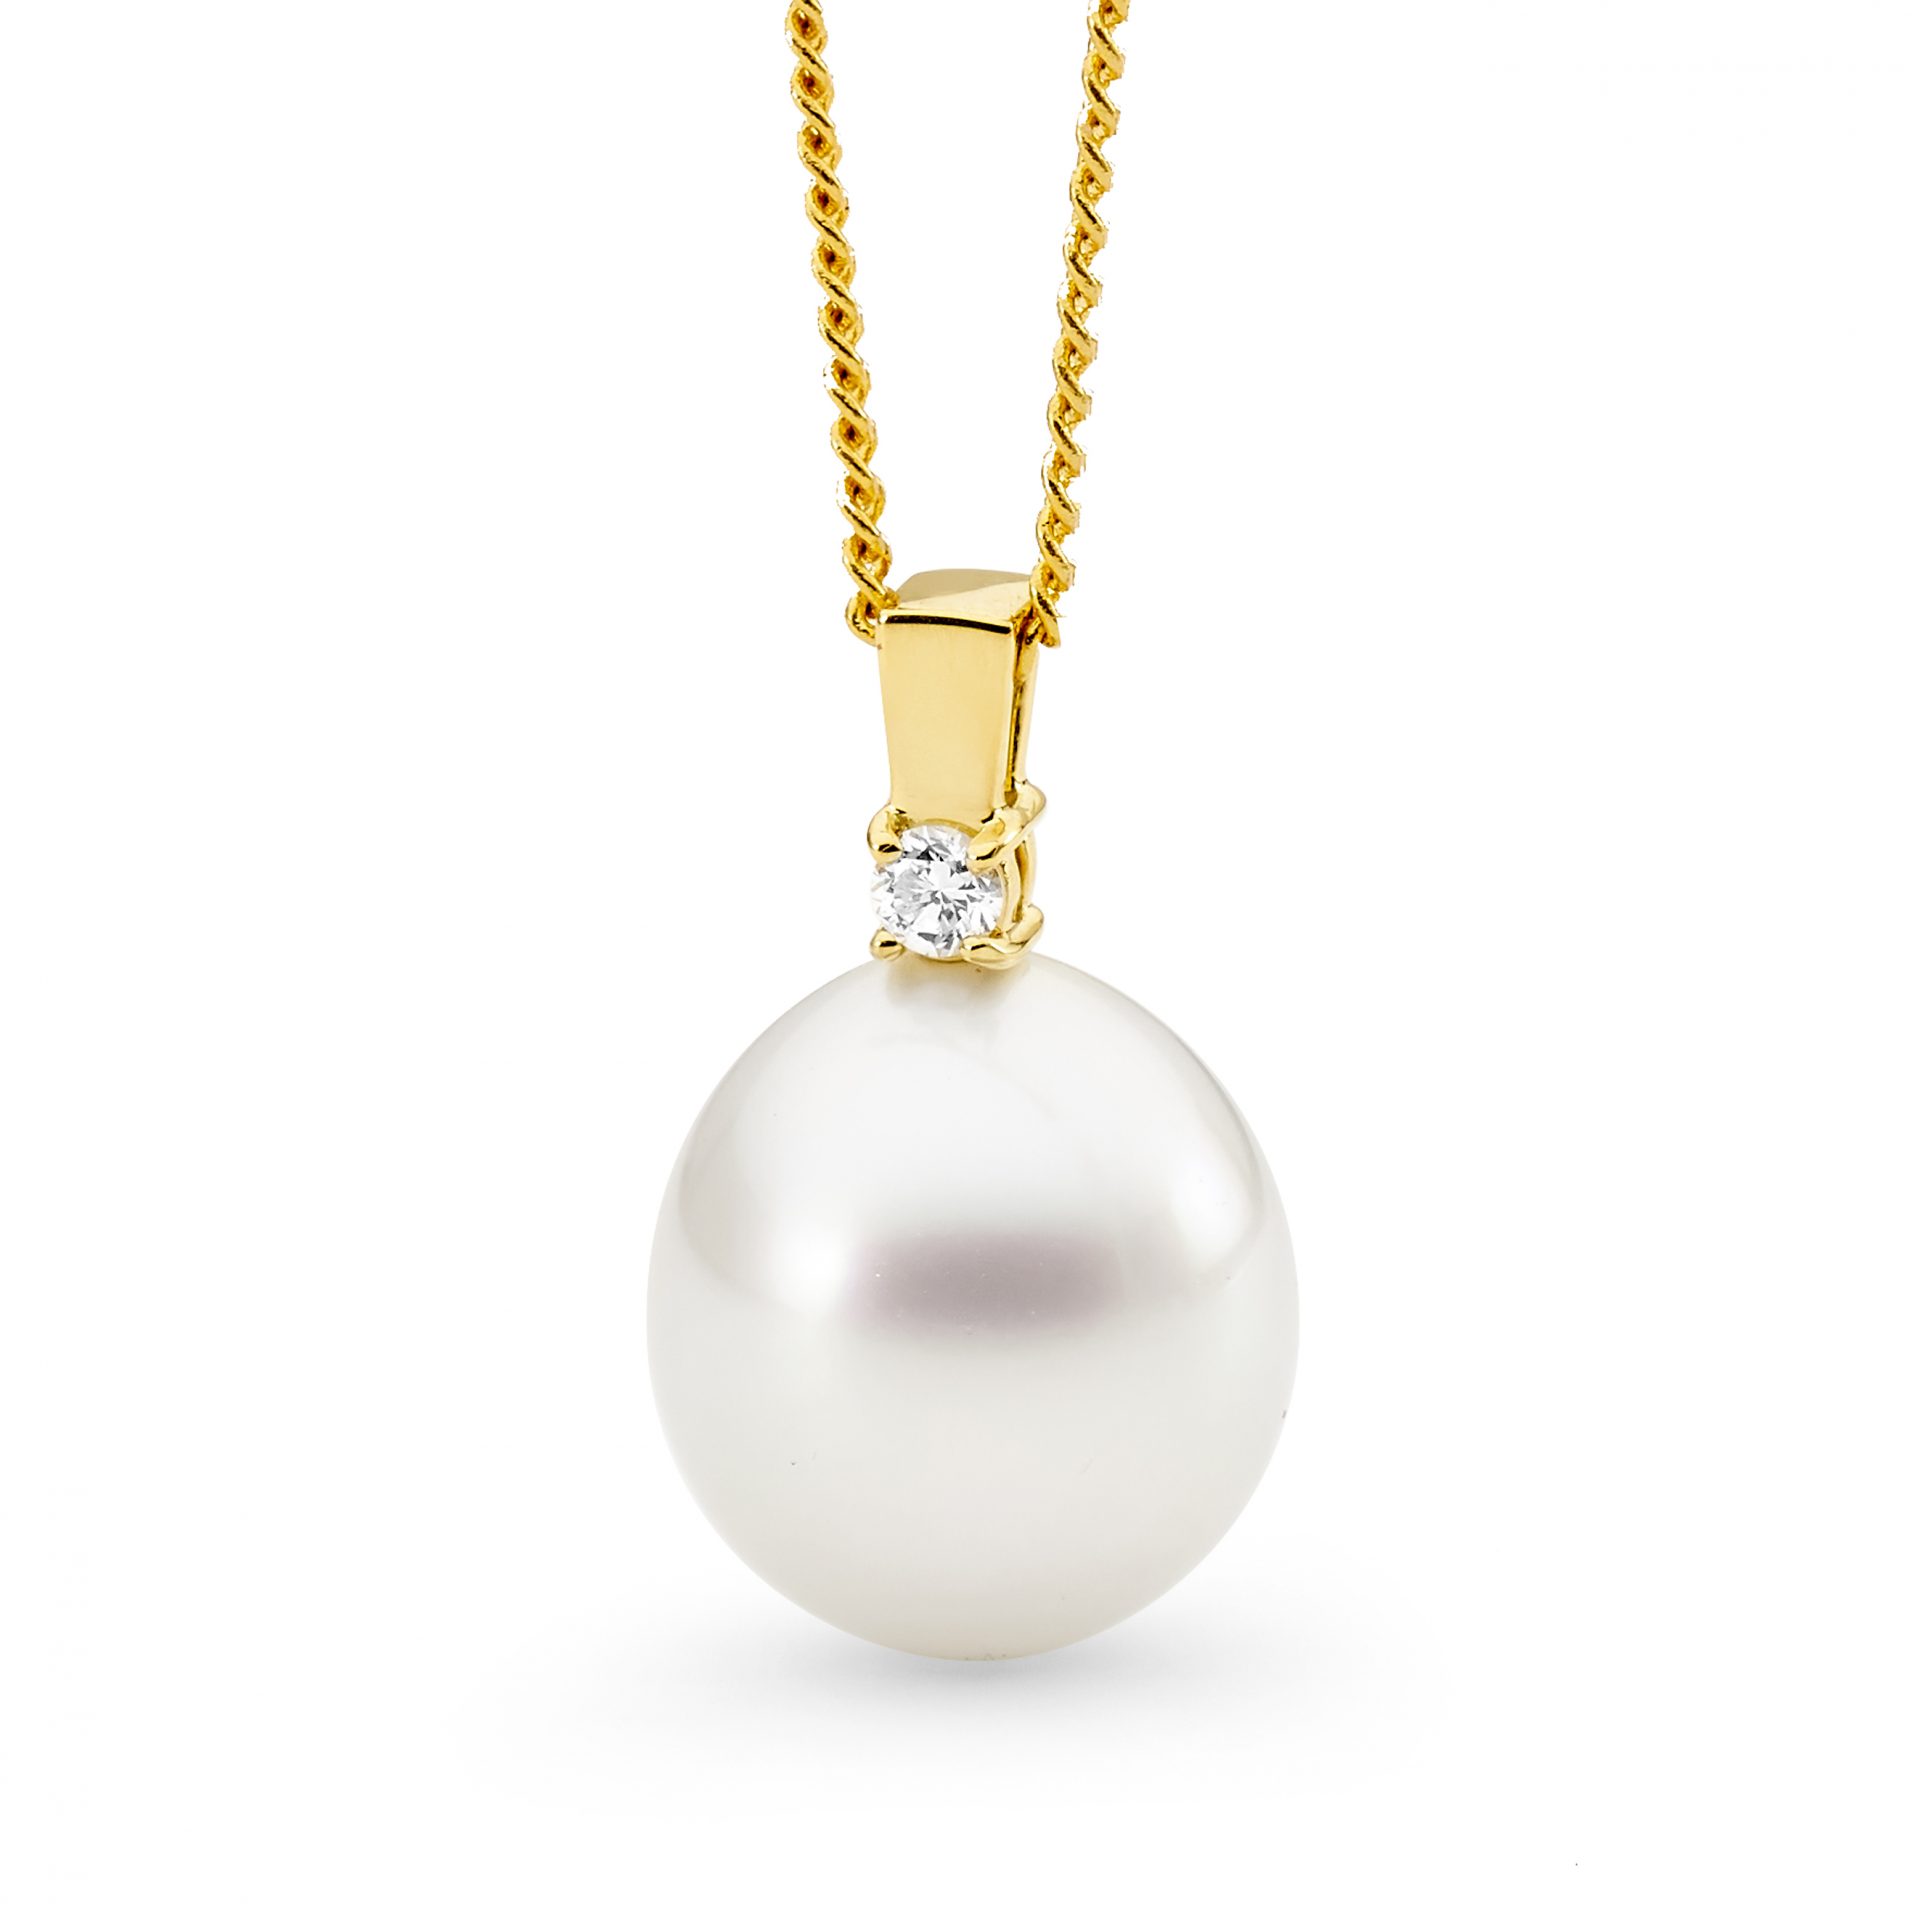 Claw Set Diamond and Pearl Pendant - Allure South Sea Pearls